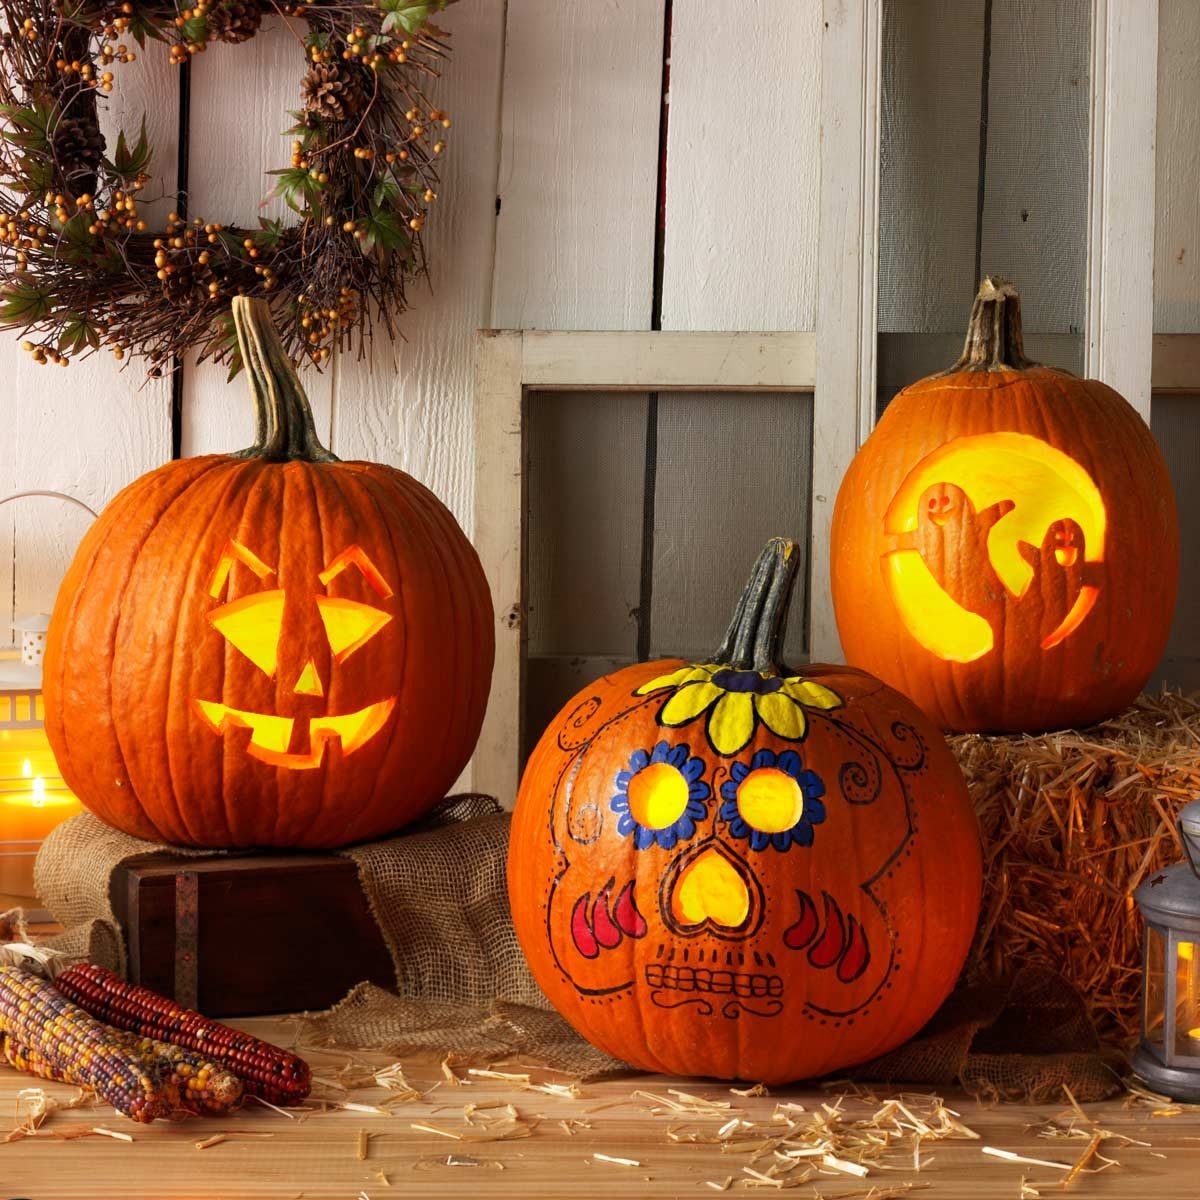 Pumpkin Face With X Eyes: Spook Up Your Halloween Décor And Grab ...